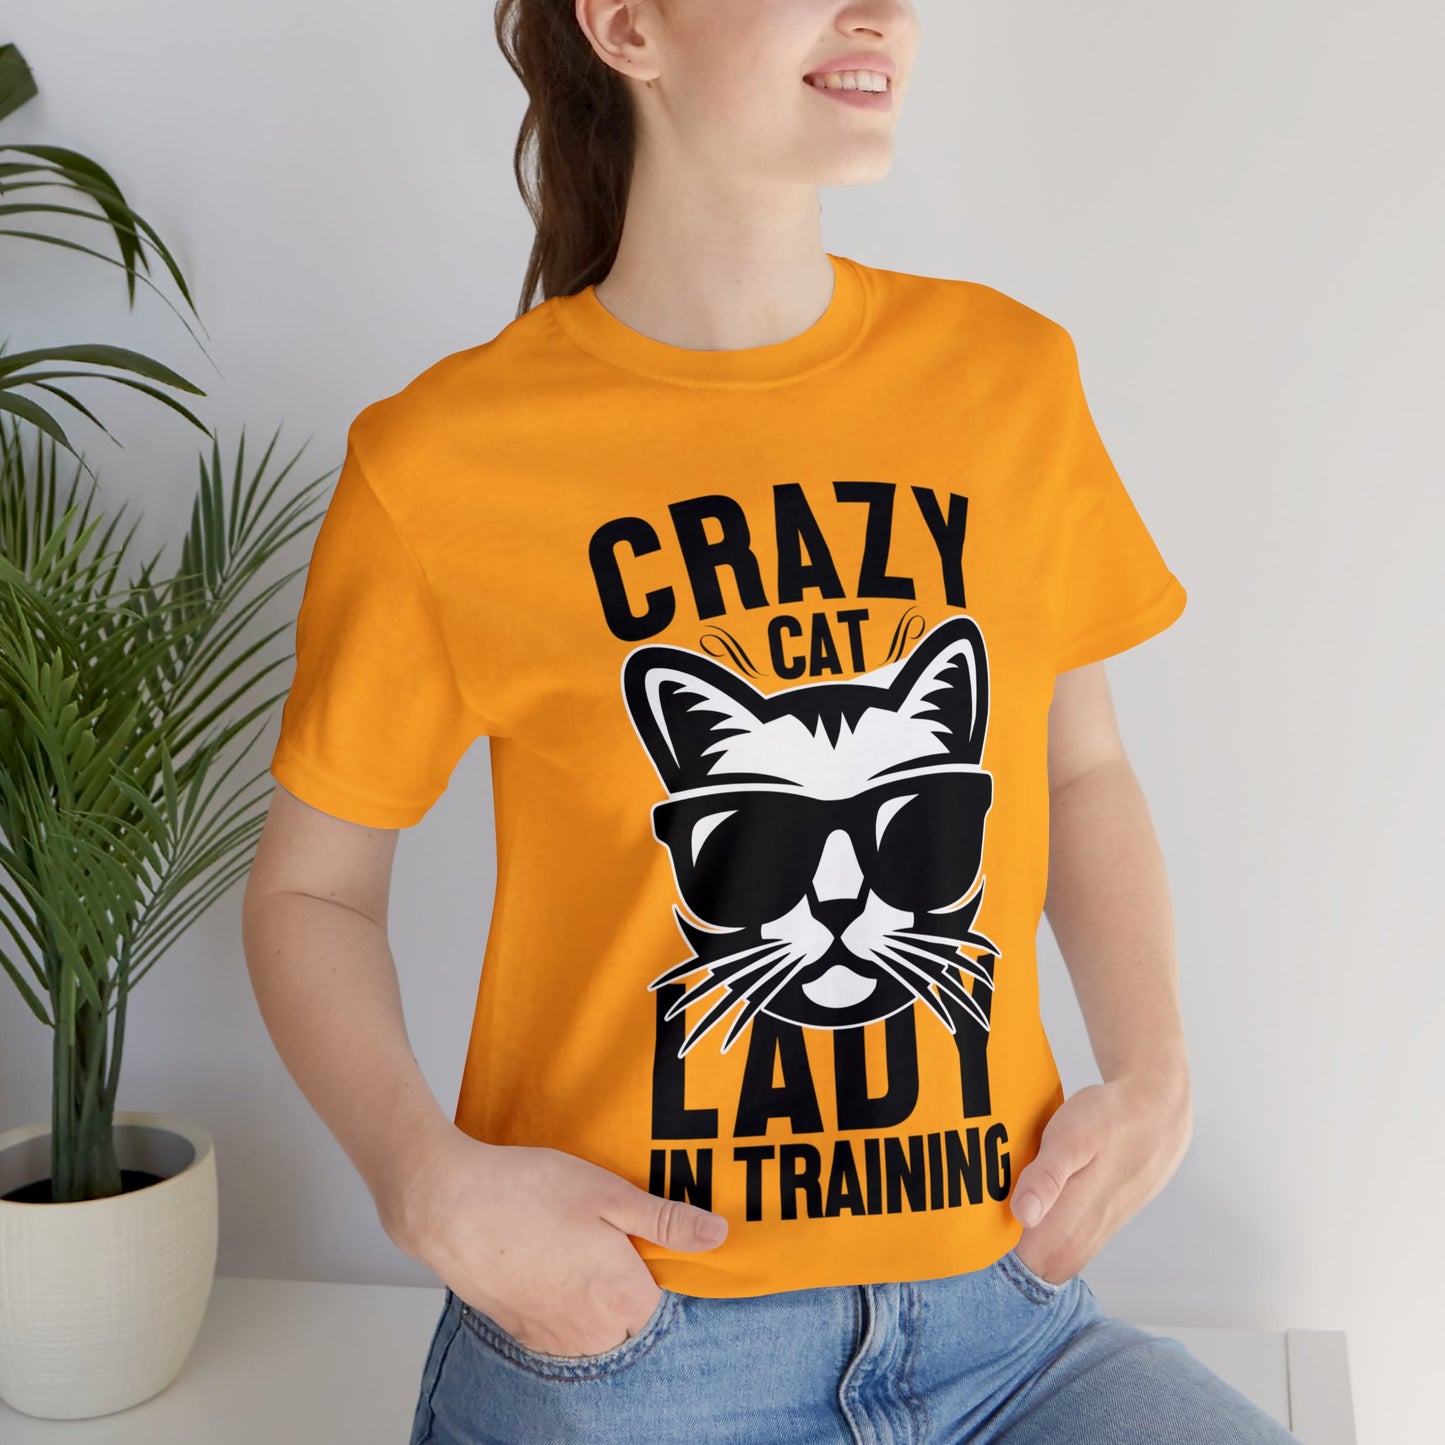 Crazy Cat Lady in Training T-Shirts: Purr-fect Apparel for Feline Enthusiasts!